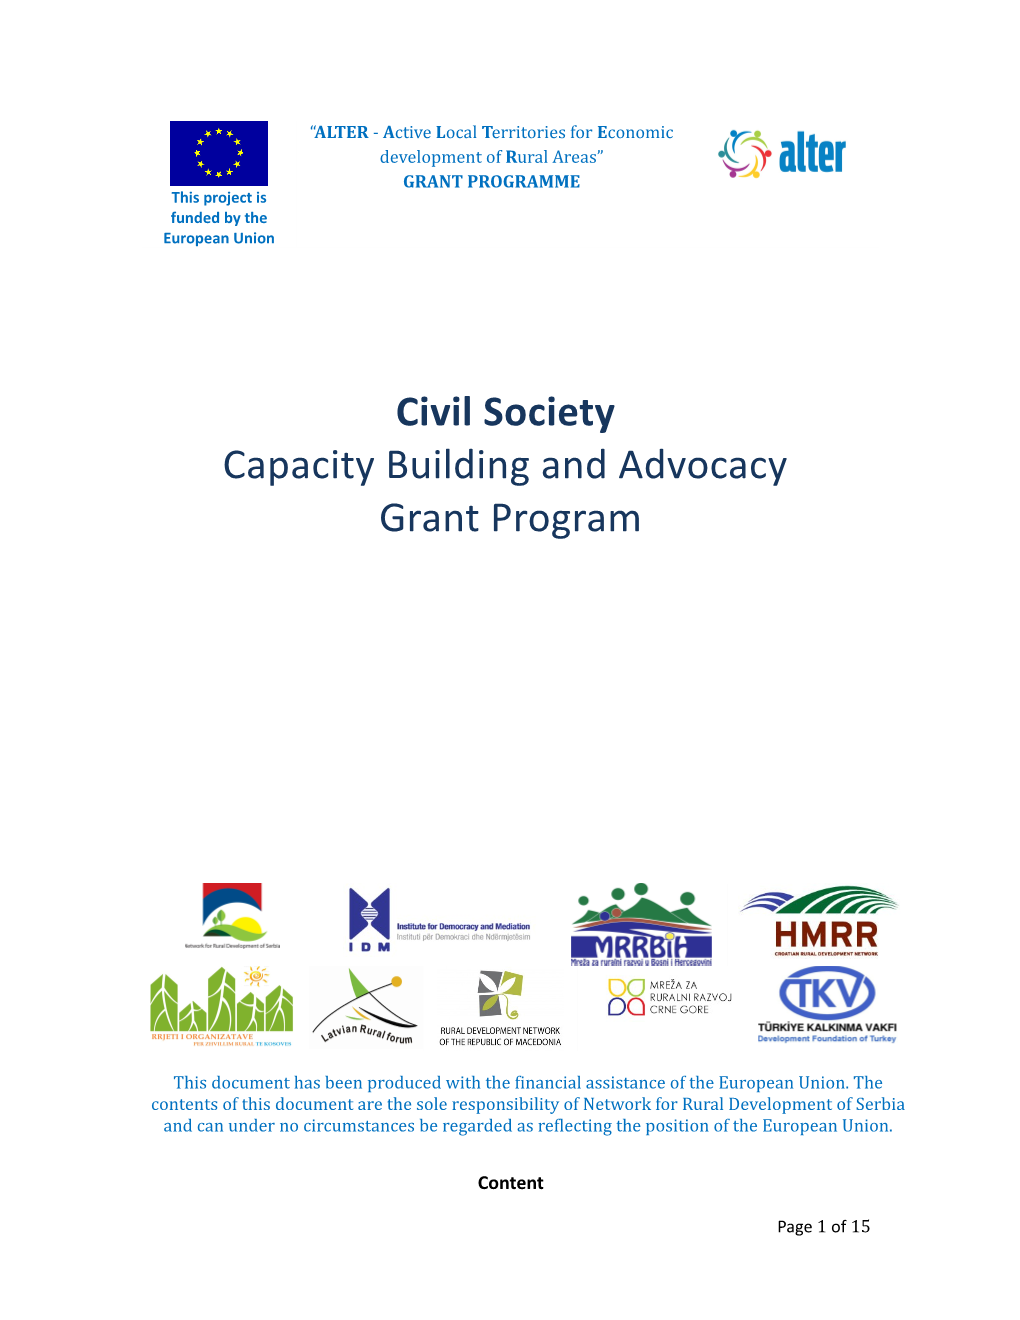 Capacity Building and Advocacy